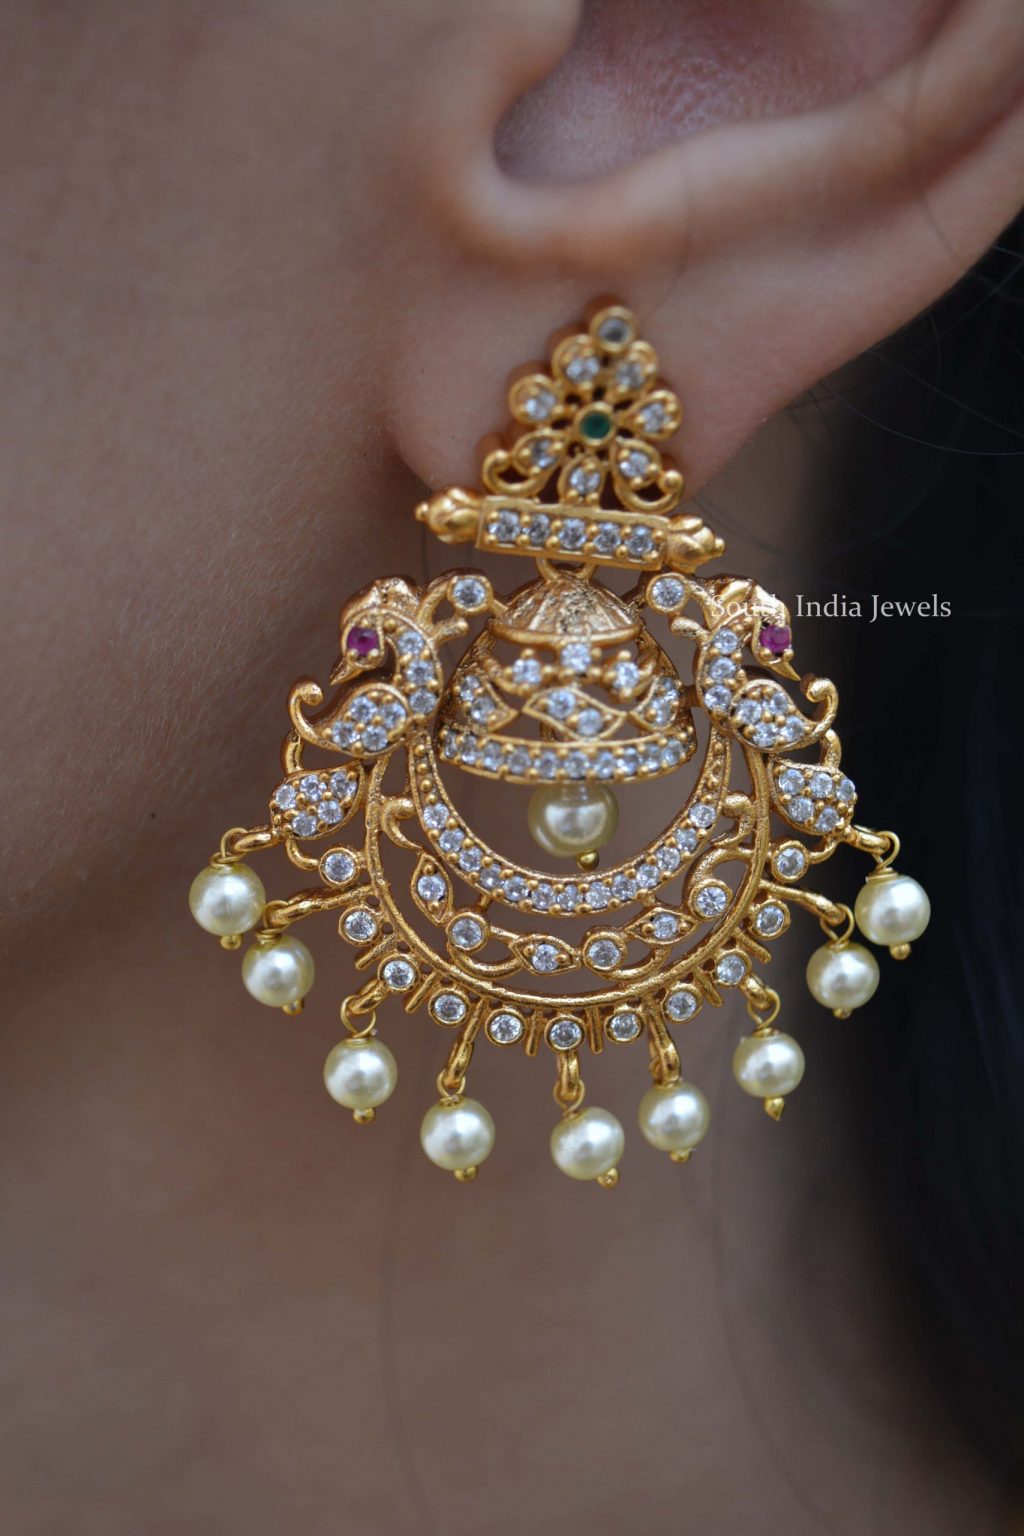 Matte Finish AD Stone Earrings By South India Jewels!